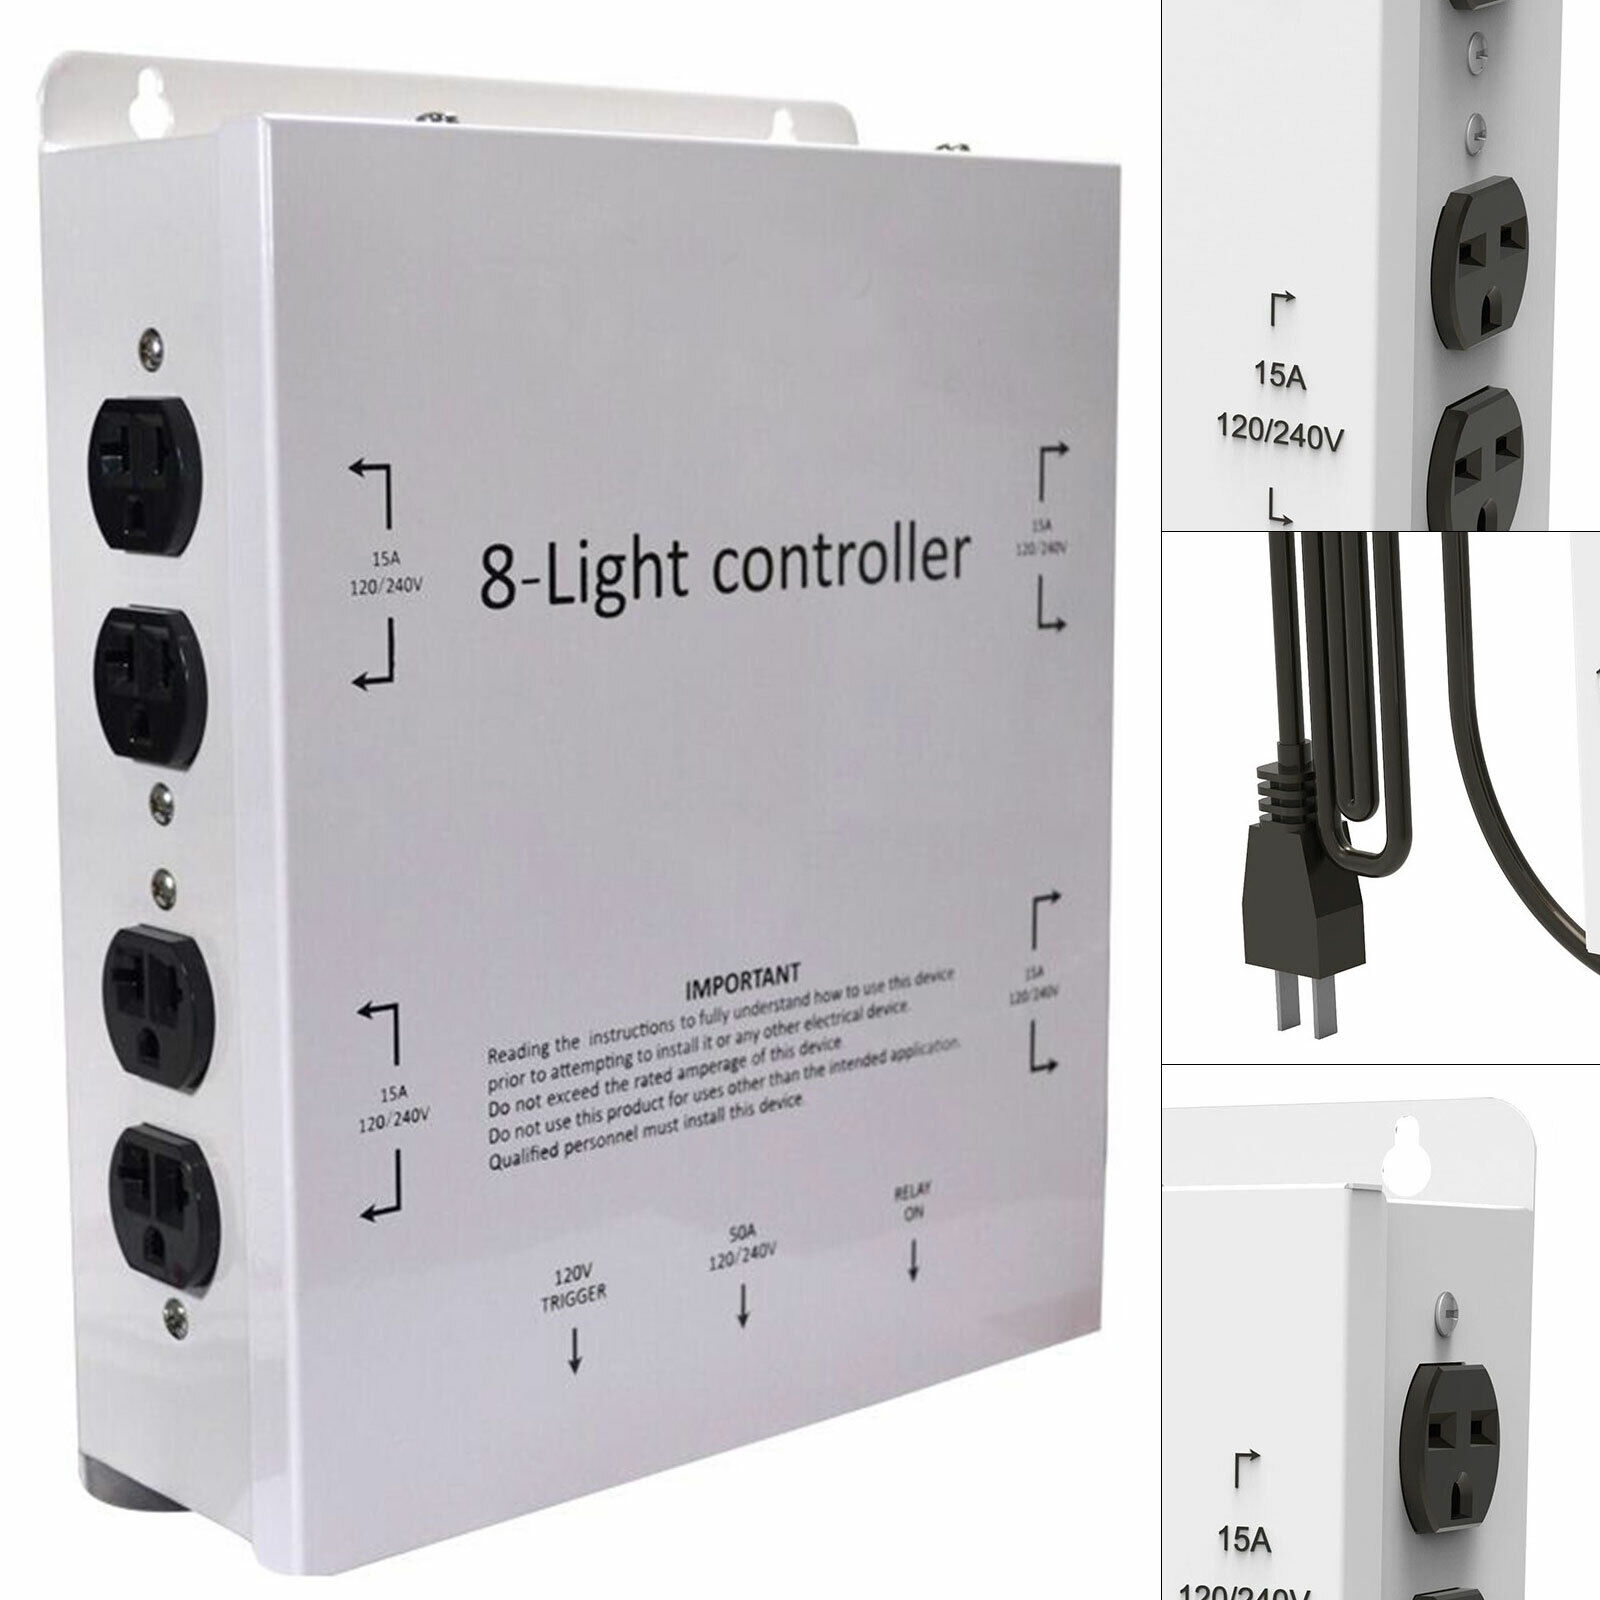 MLC HID Electric Light Control Box Controller 50 Amp 120/240V 8KW w/ 8 Outlet US